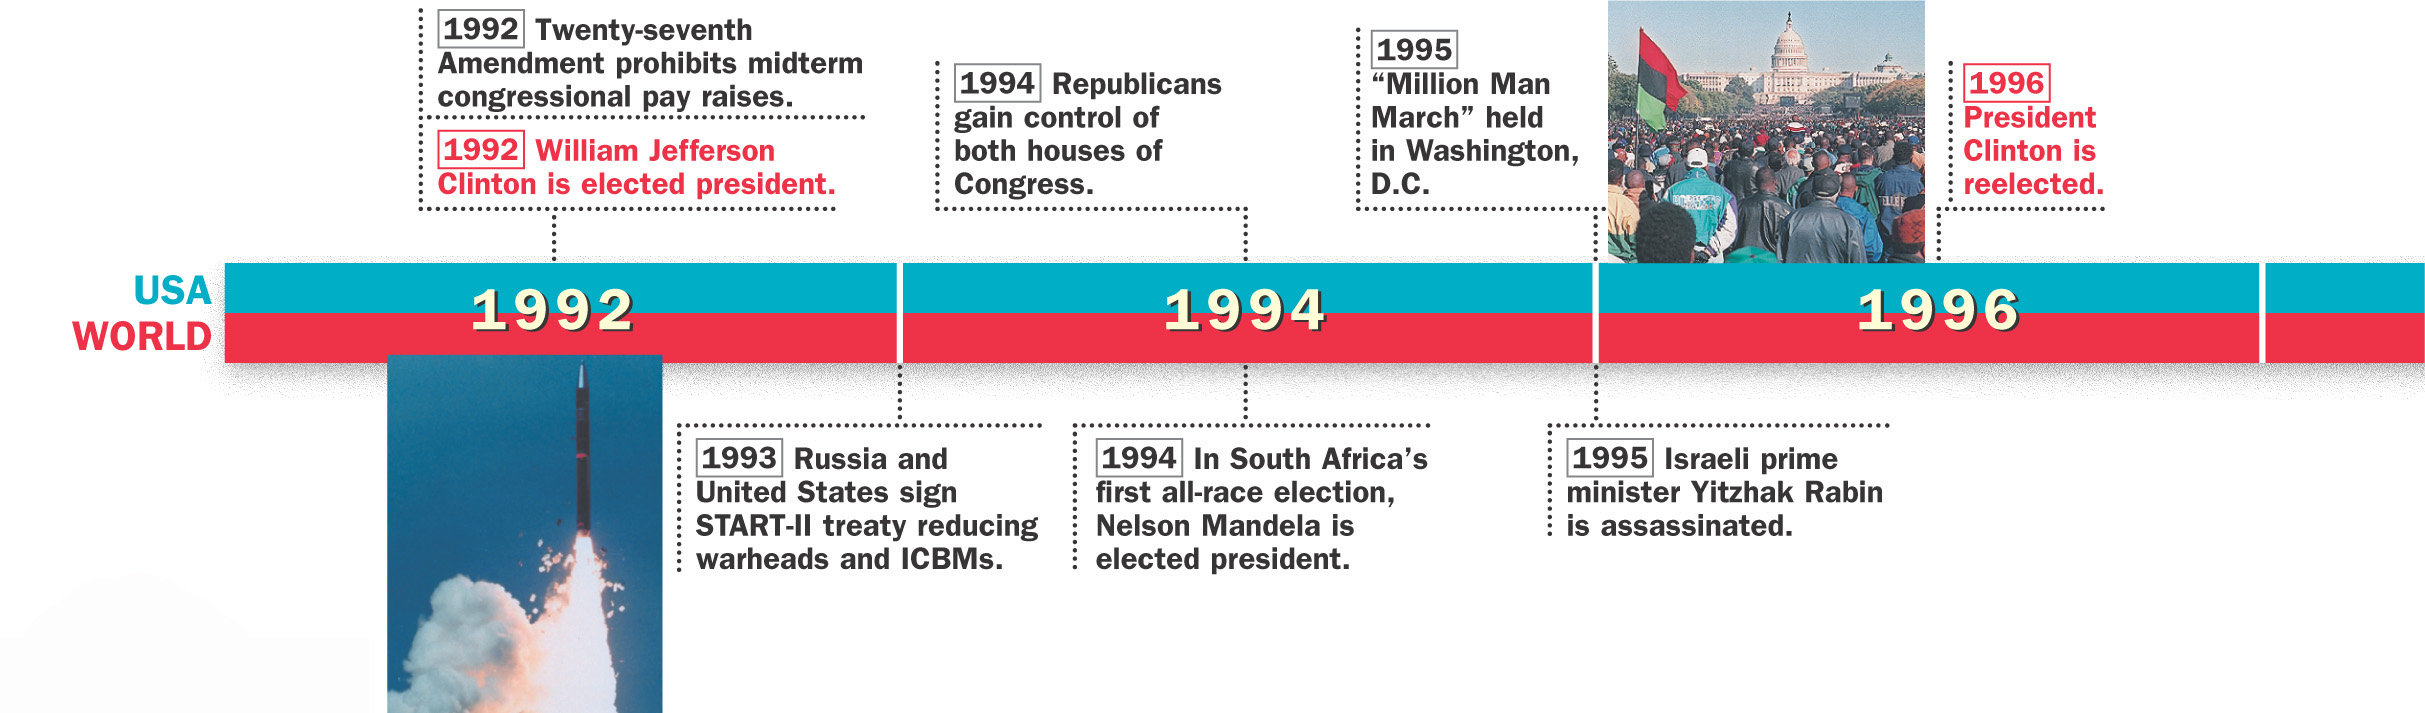 A timeline of historical events from 1992 to 2005 in both the U.S. and the world